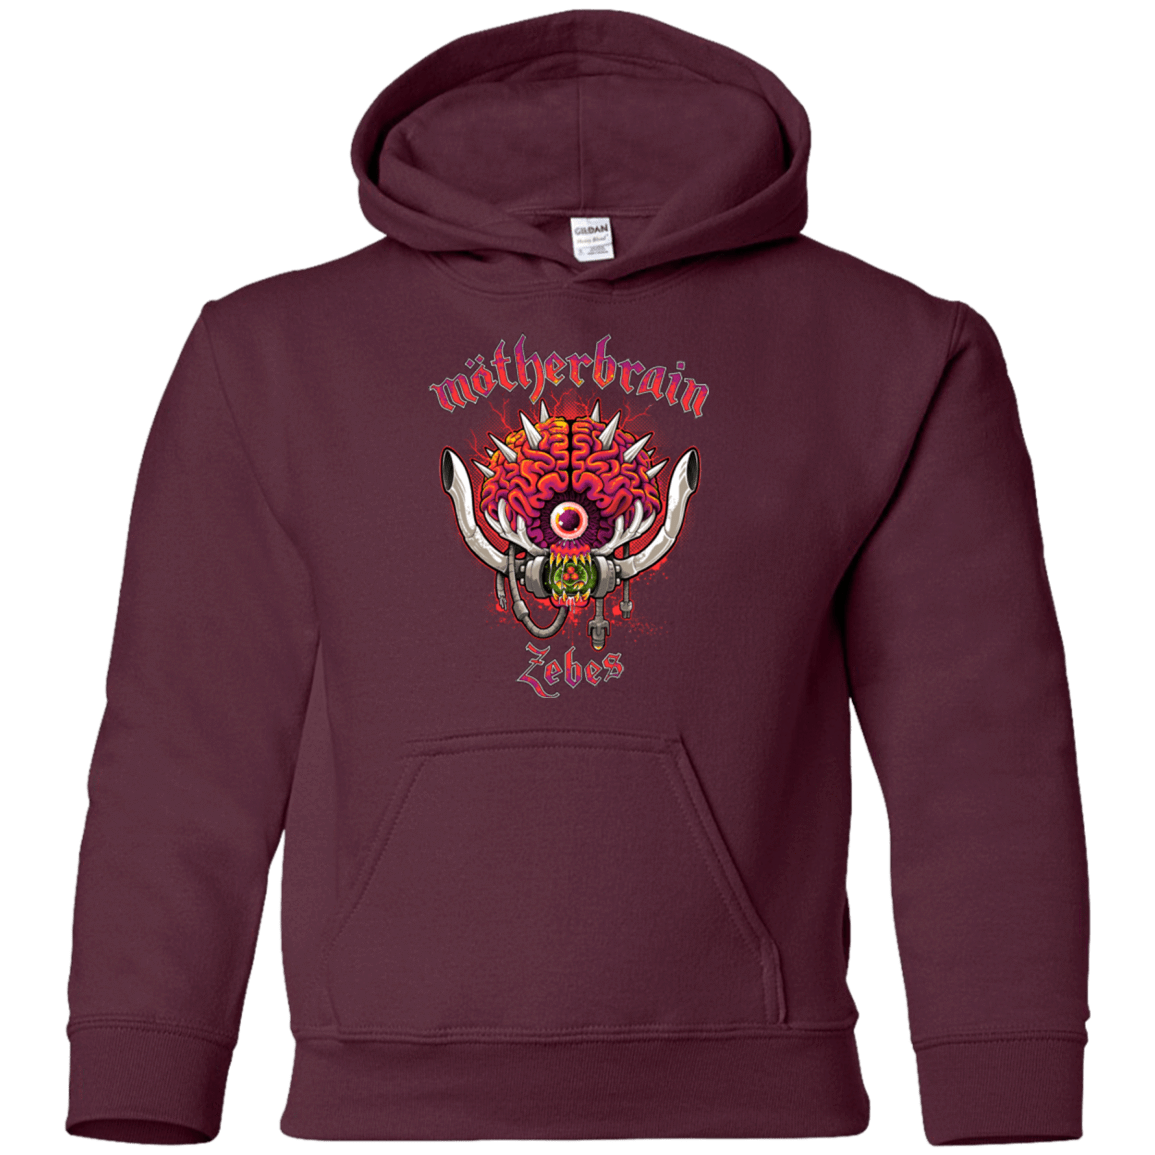 Sweatshirts Maroon / YS Live From Zebes Youth Hoodie